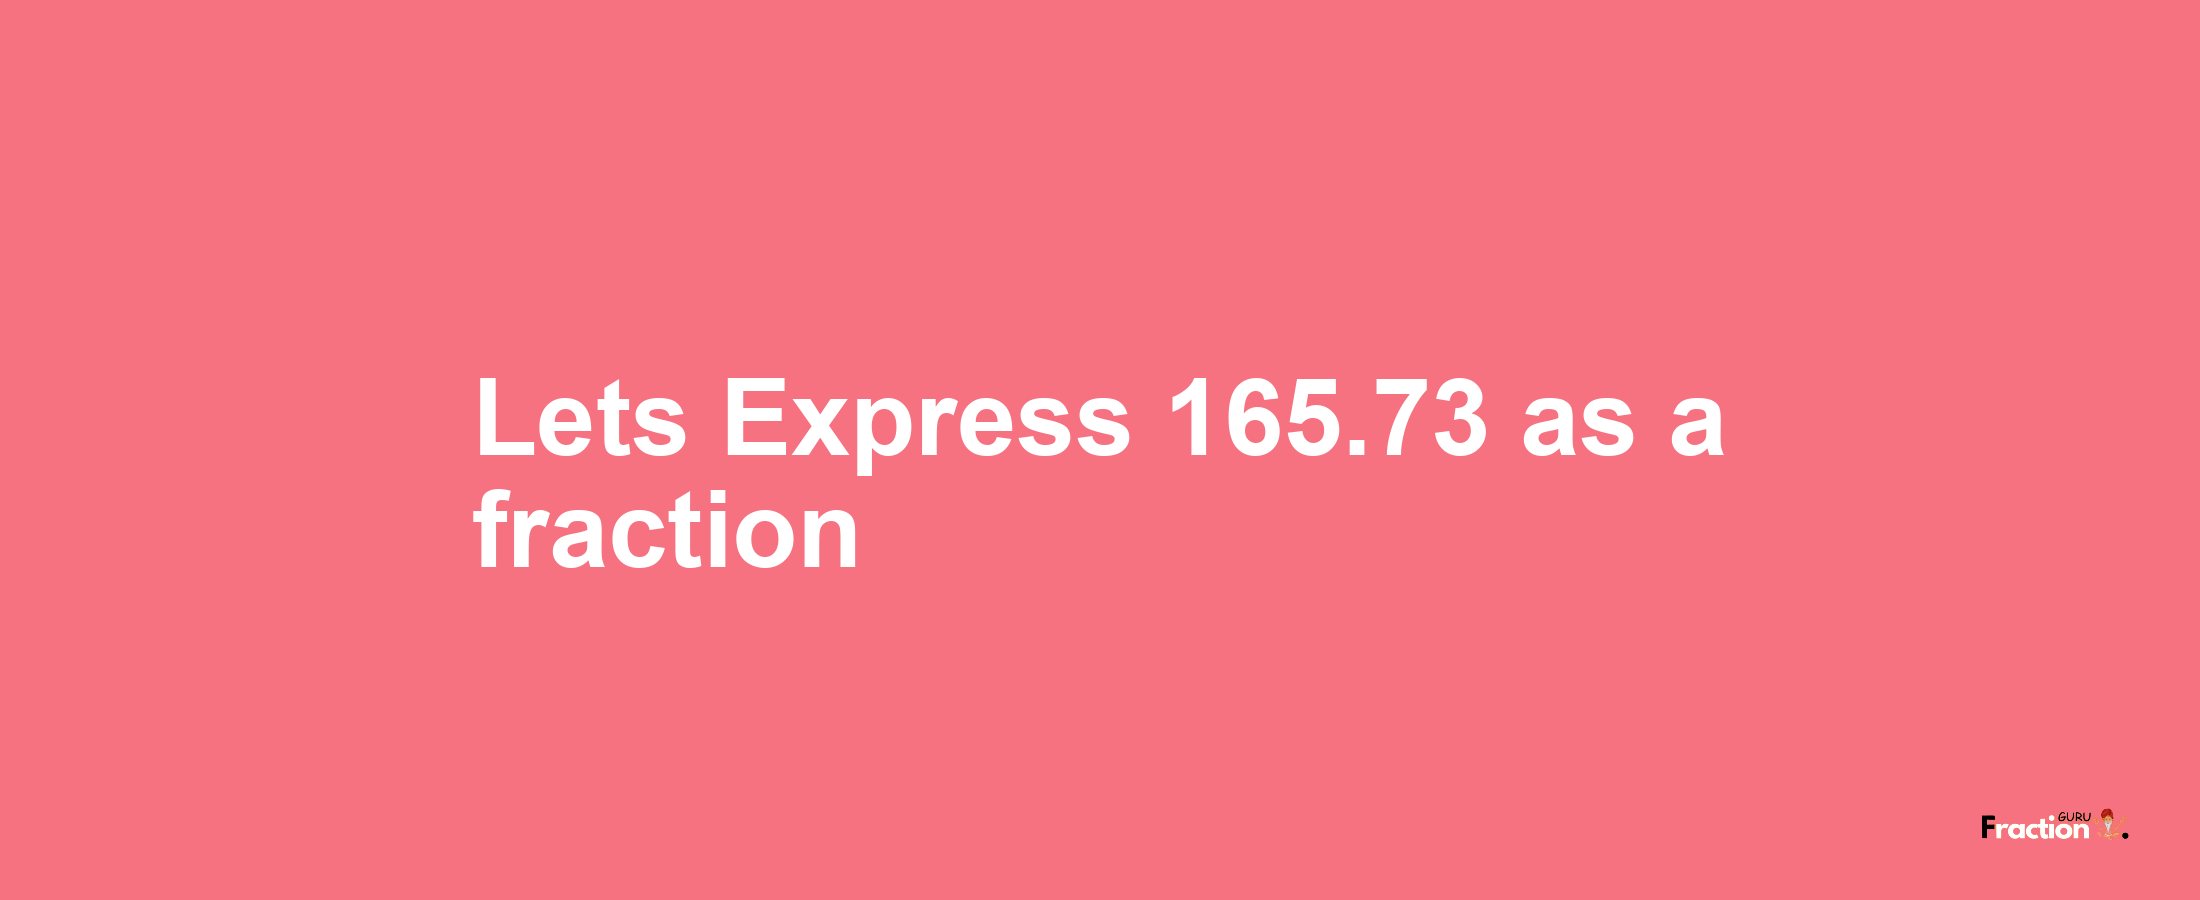 Lets Express 165.73 as afraction